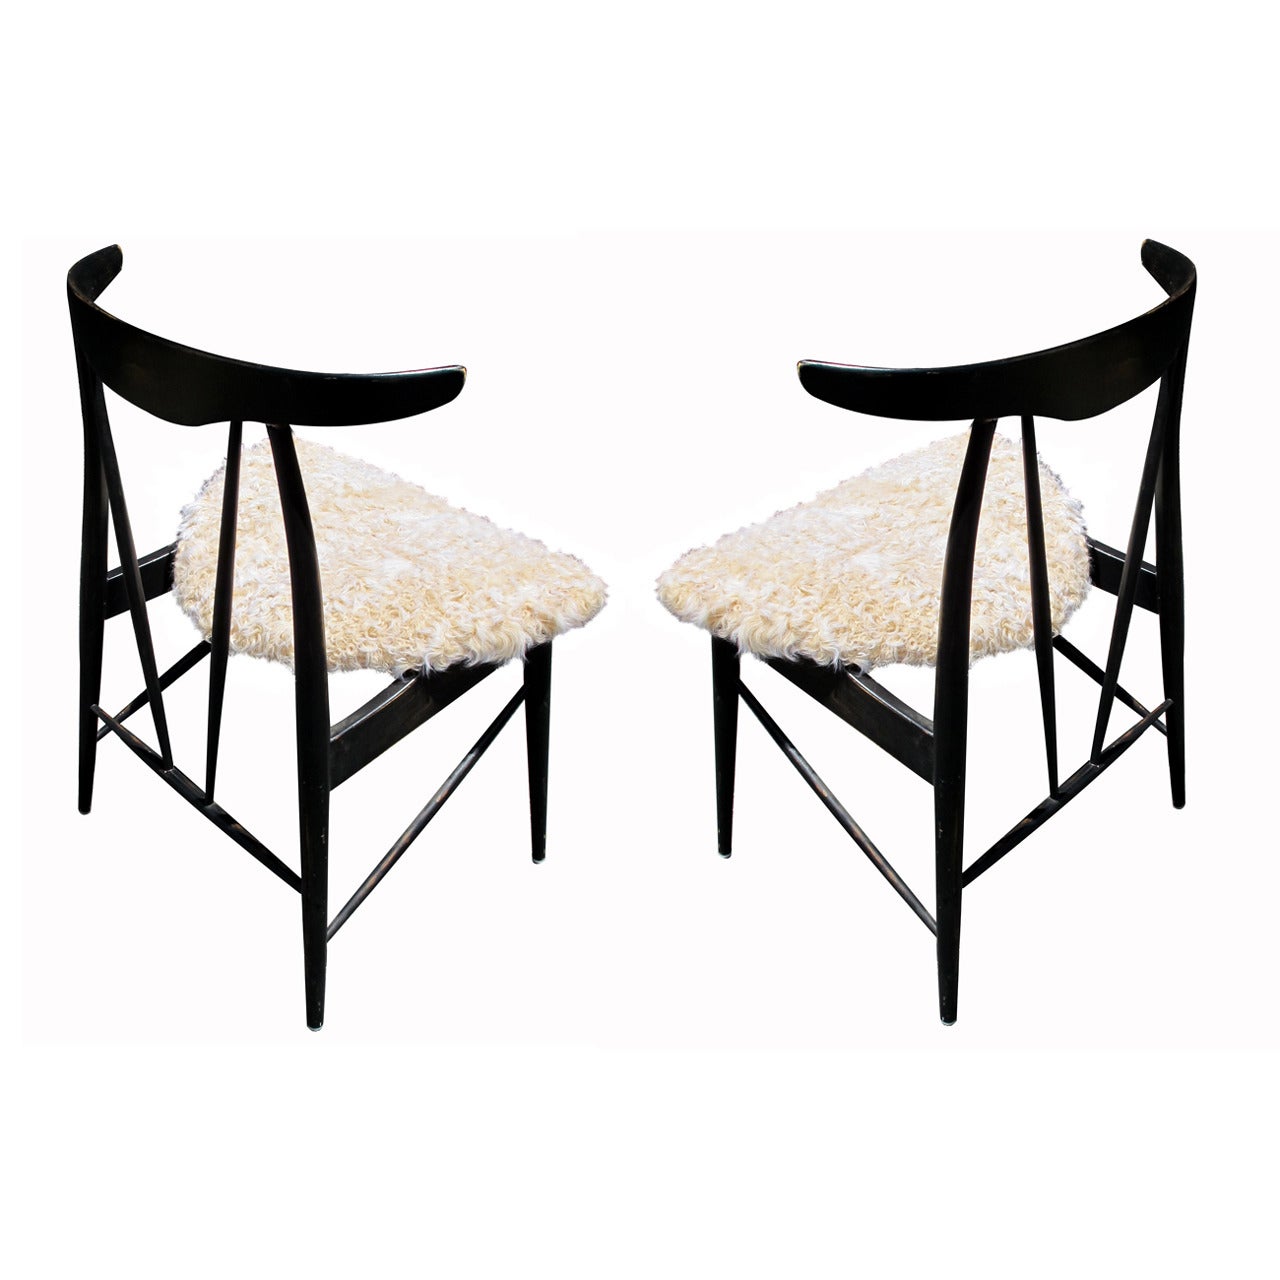 A Pair of 1950s Sculptural Spindleback Side Chairs Upholstered in Curly Lamb